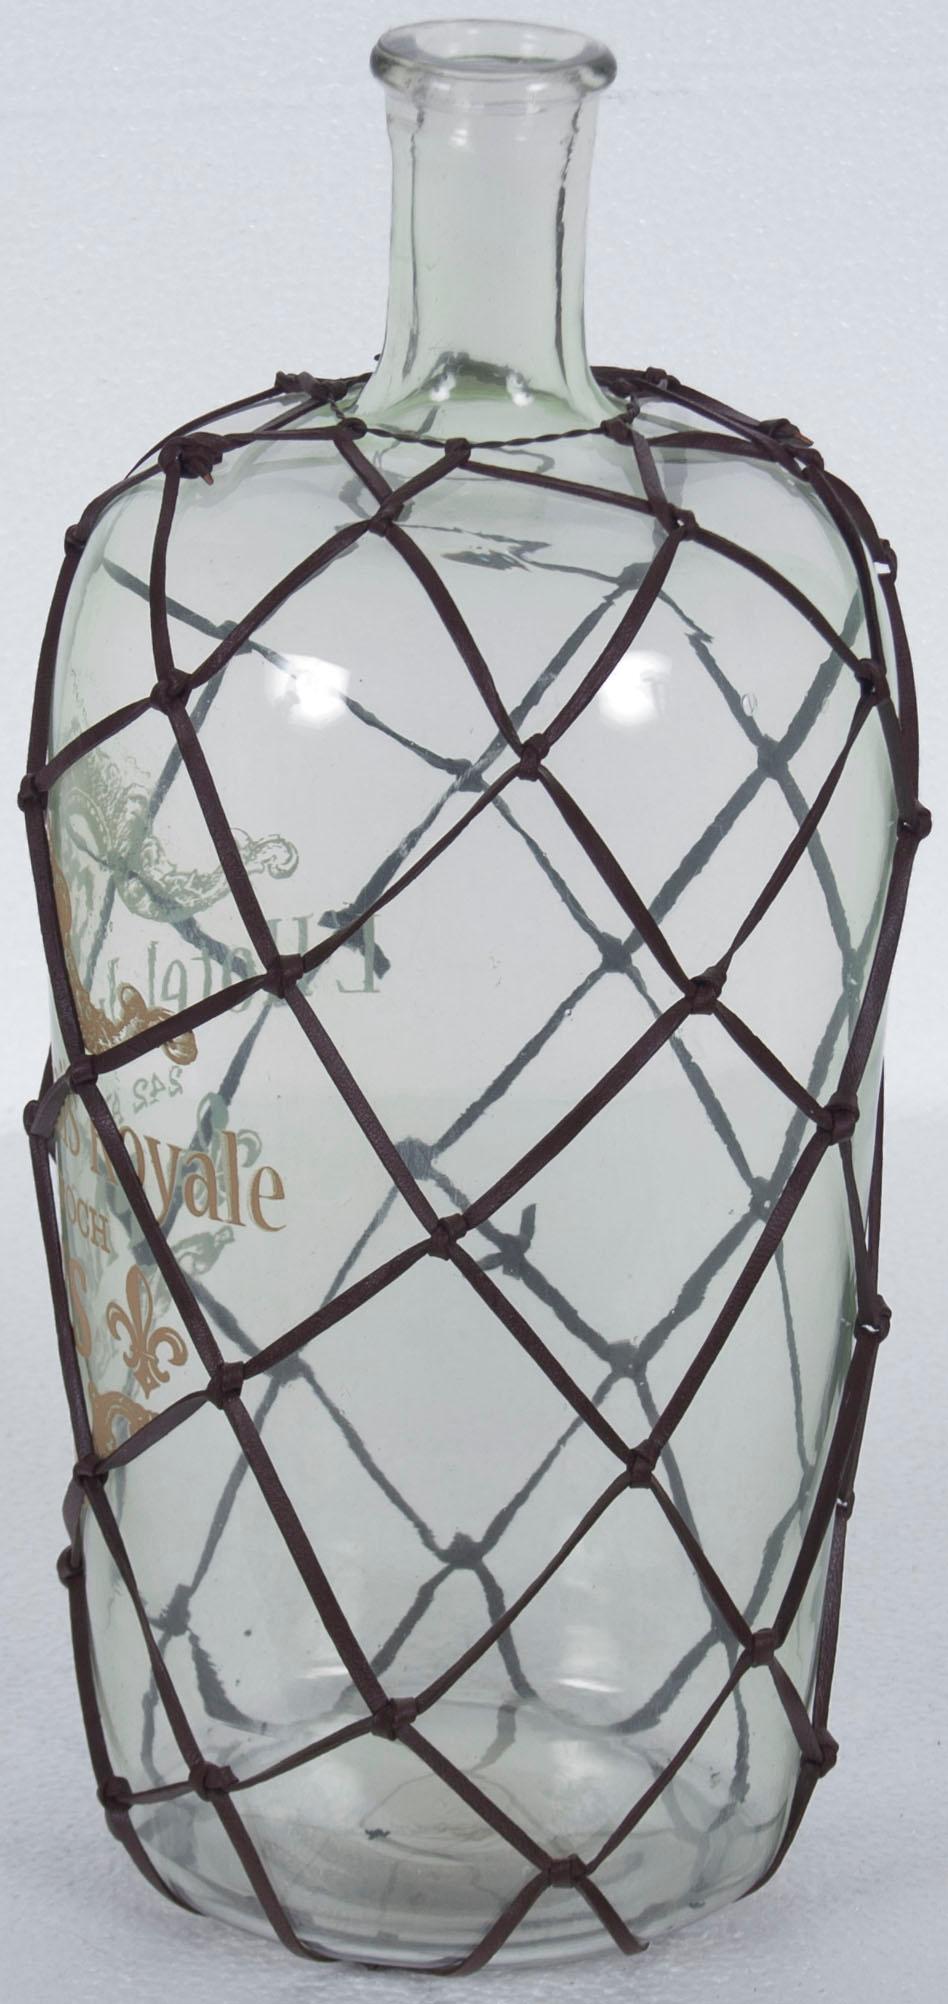 This unique leather wrapped decorative bottle is an all season decoration for the home. Its fairly large size makes it ideal for a variety of decorating ideas that are only limited by your imagination! A knotted leather cord mesh surrounds the glass